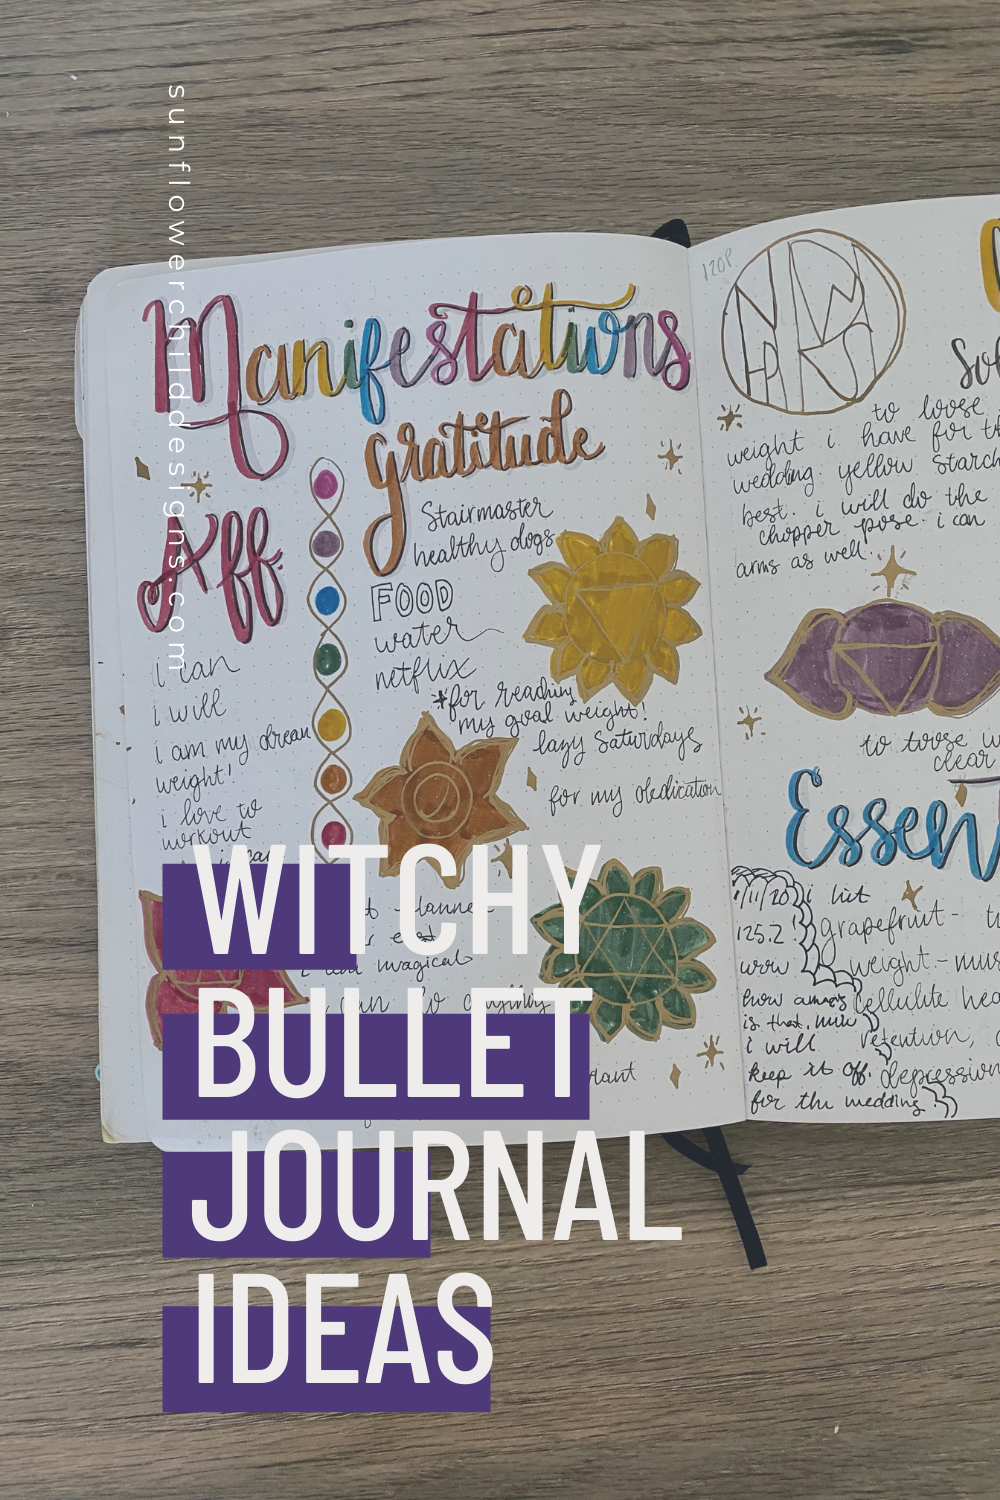 witchy-bullet-journal-january-bullet-journal-ideas 5.png